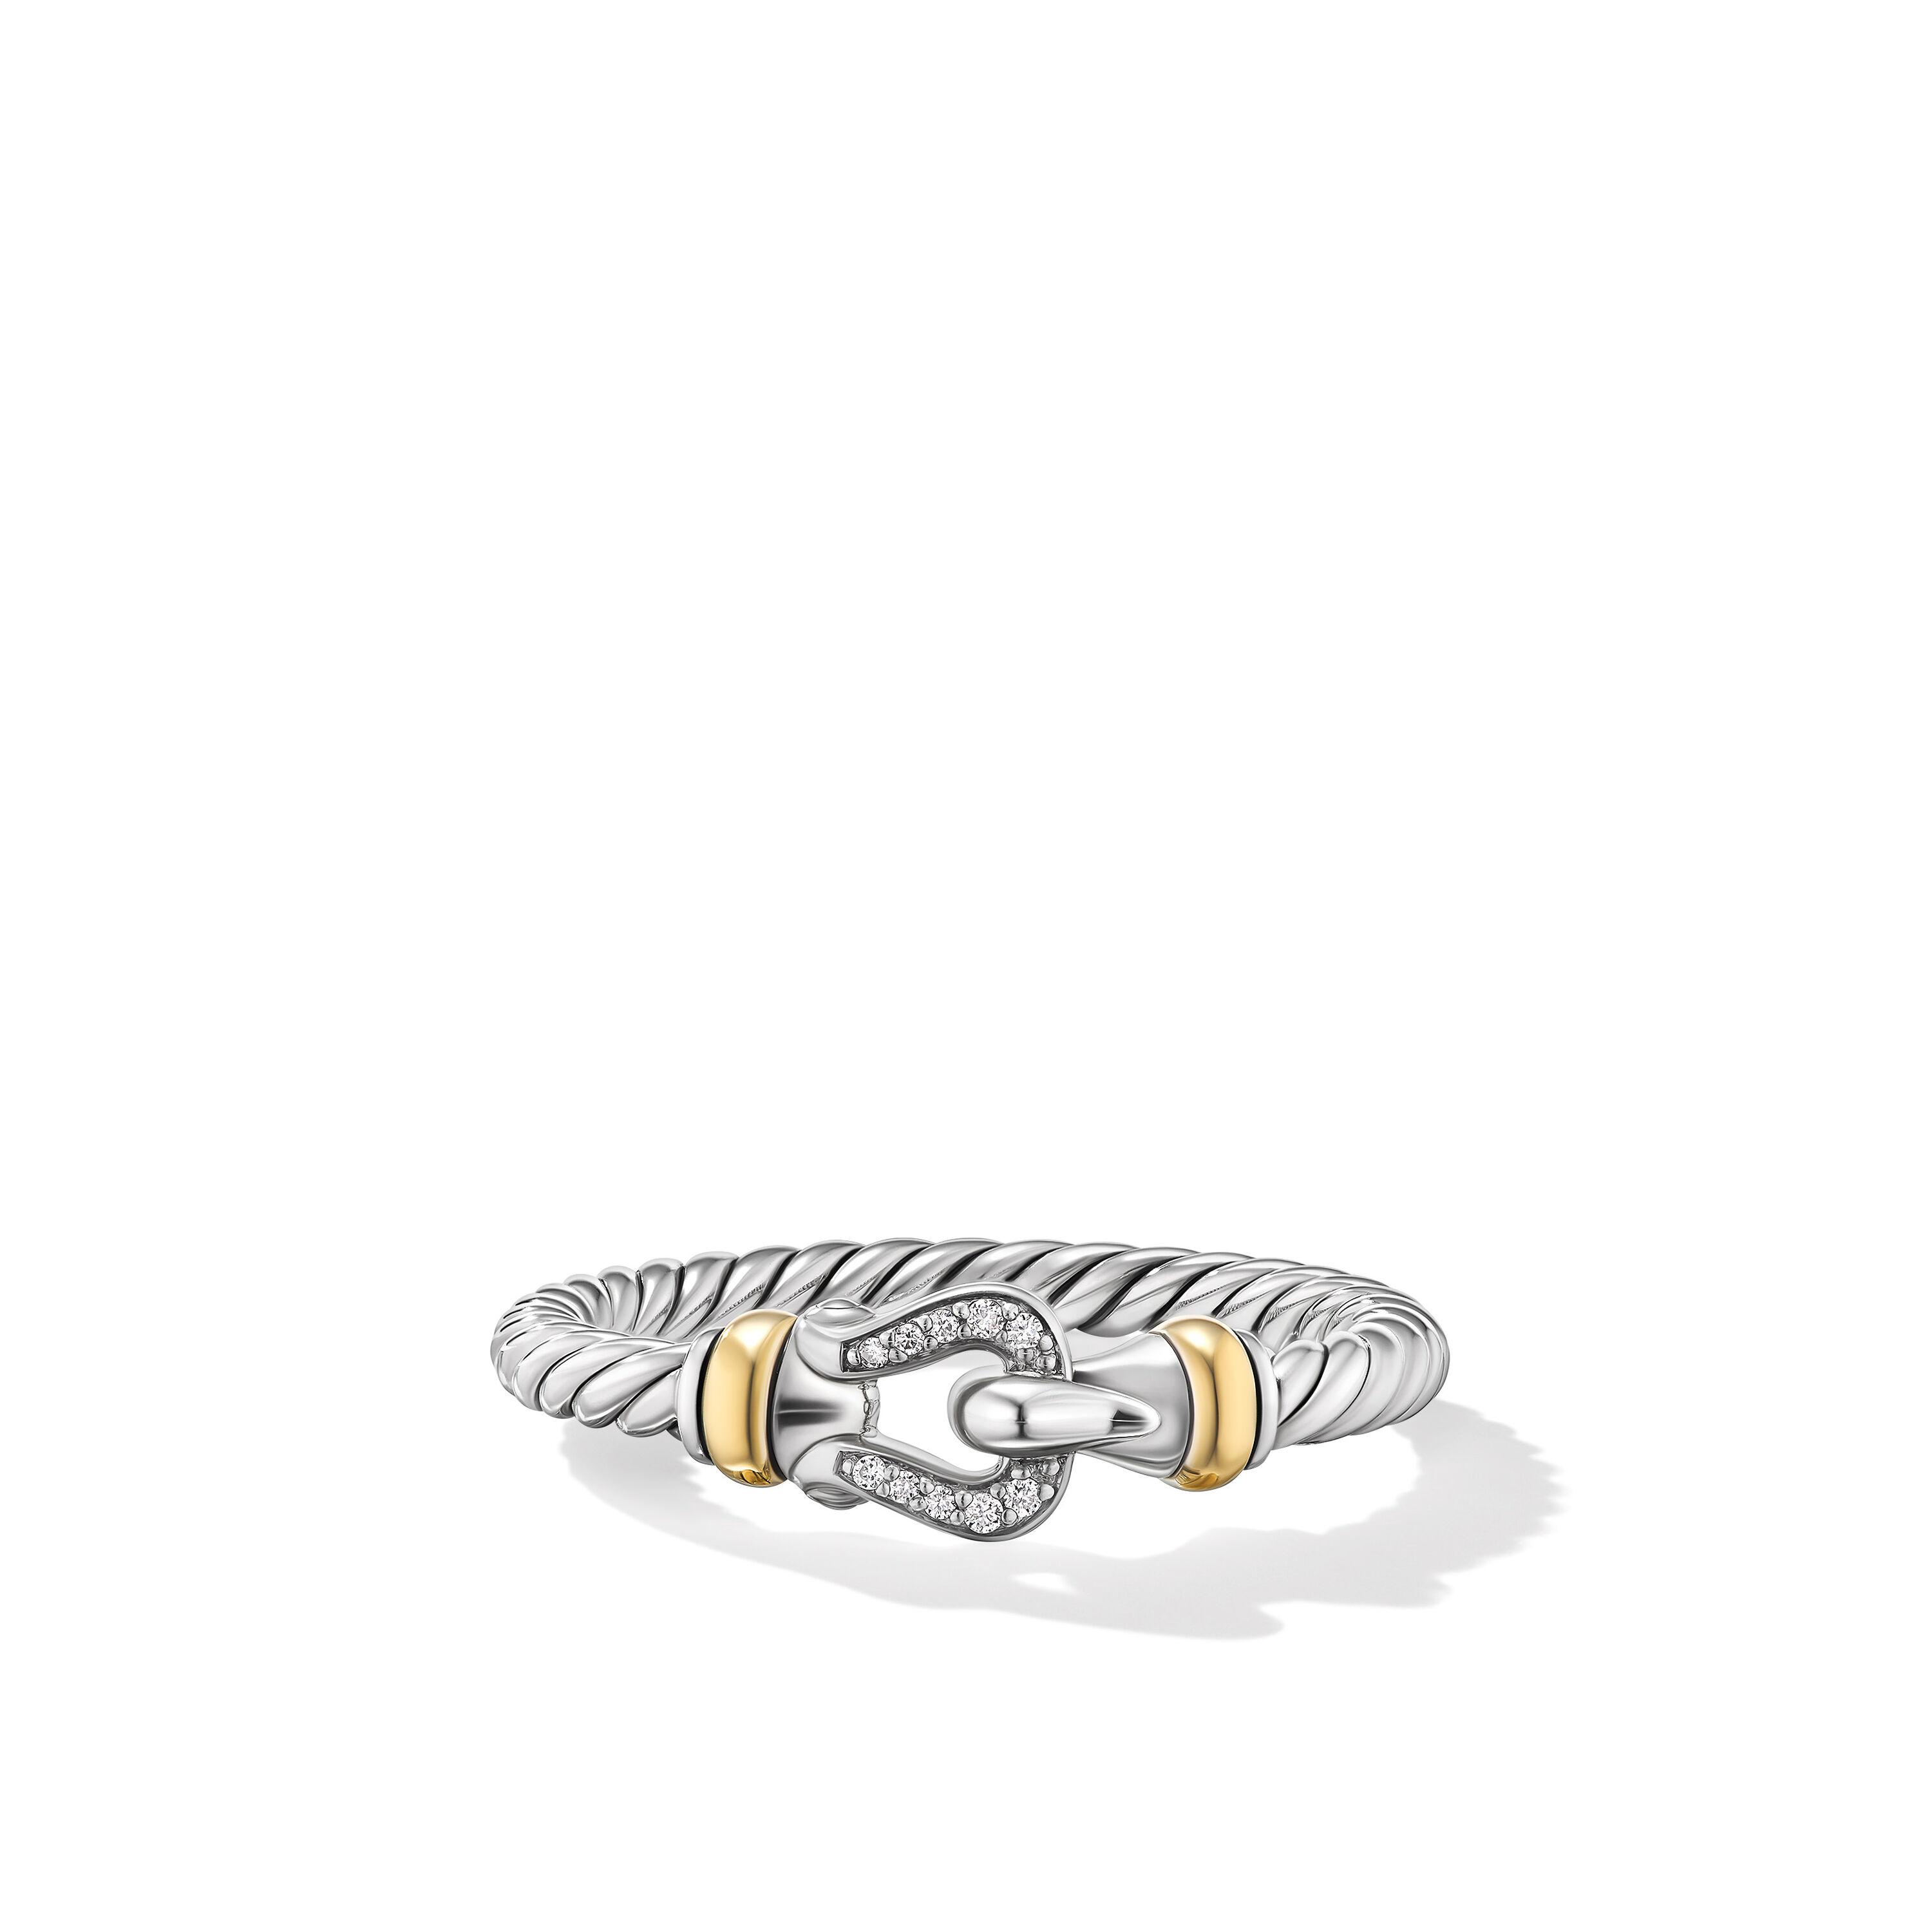 David Yurman Sterling Silver Petite Buckle Ring with 18k Yellow Gold and Diamonds, Size 7